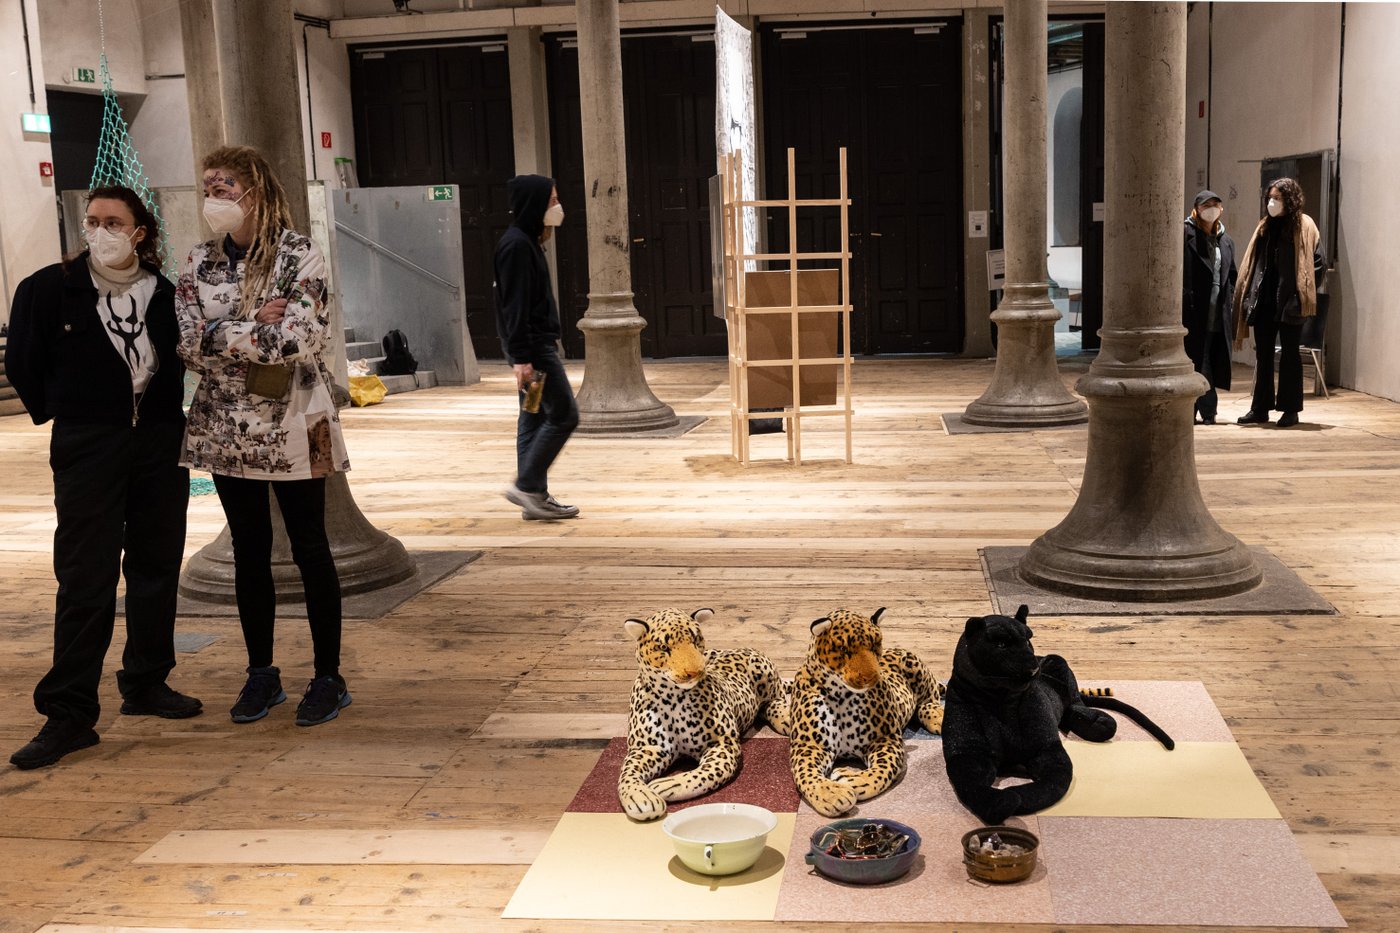 Several people wearing FFP2 masks stand in a room with columns and wooden floor. In the foreground you can see an artistic work: 3 stuffed wild cats, 2 leopards a panther lying on the floor in front of feeding bowls in the same position.